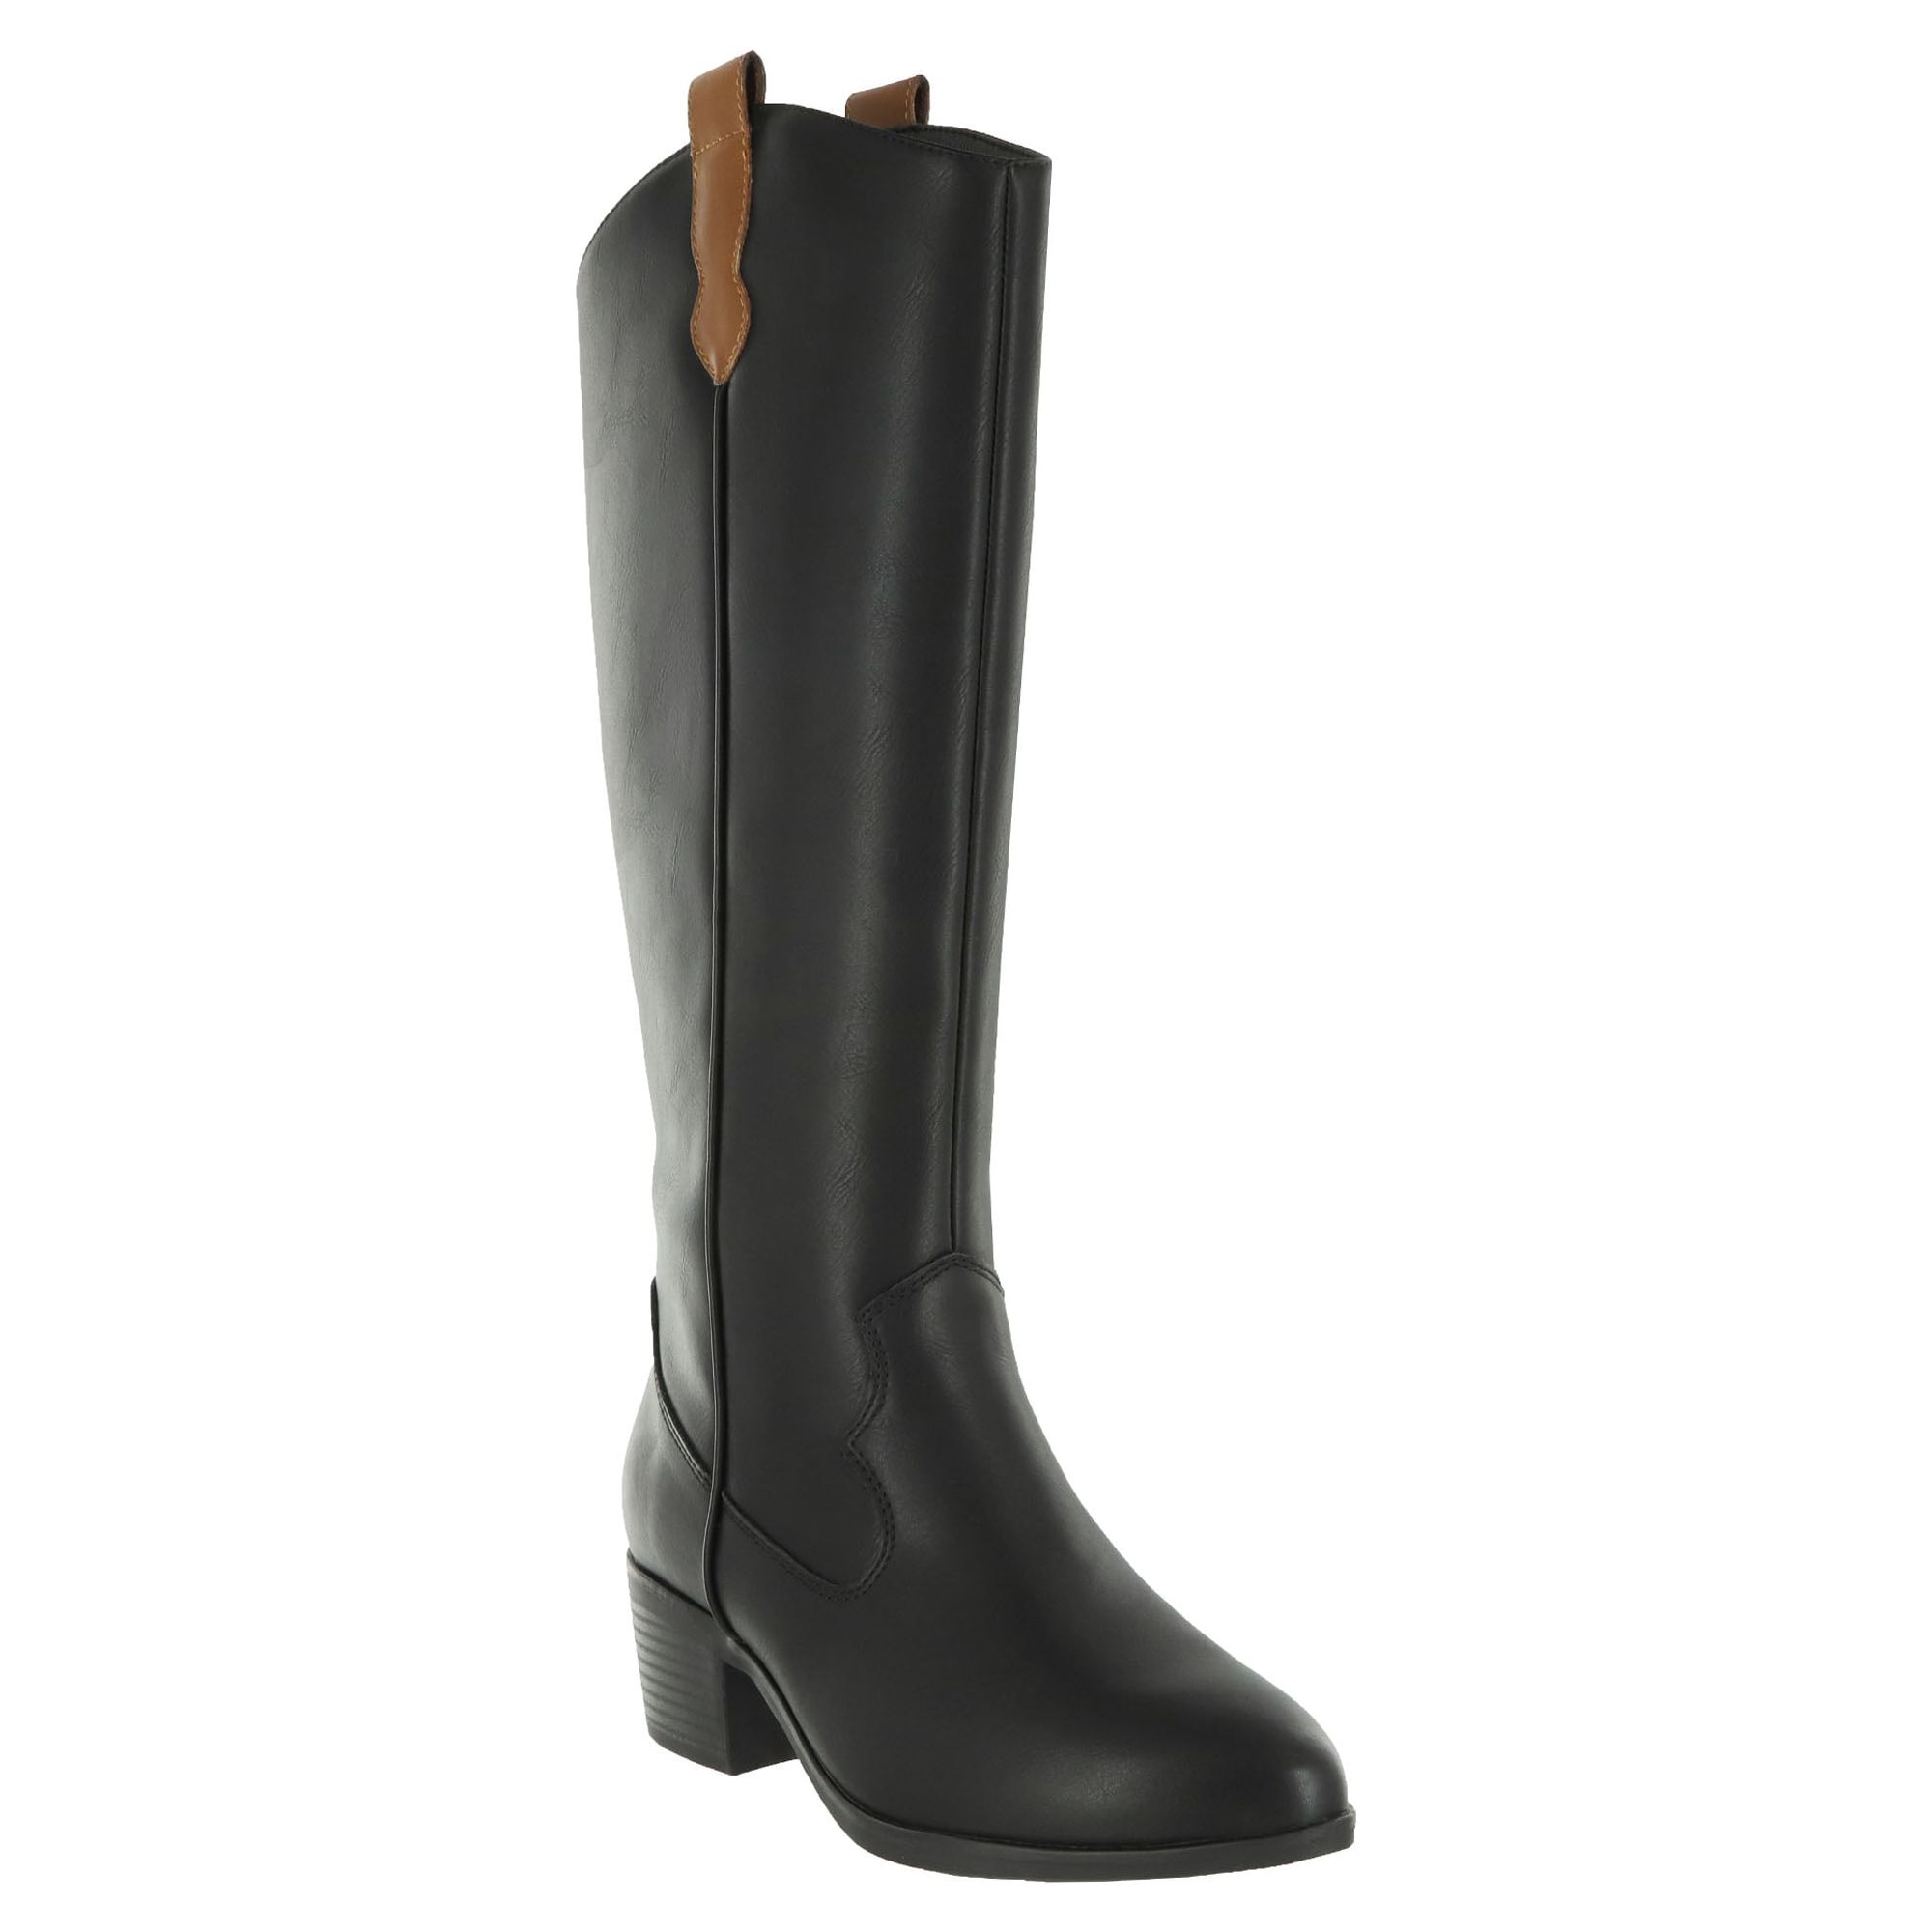 The Pioneer Woman Western Riding Boots, Women's, Wides Available - image 4 of 6